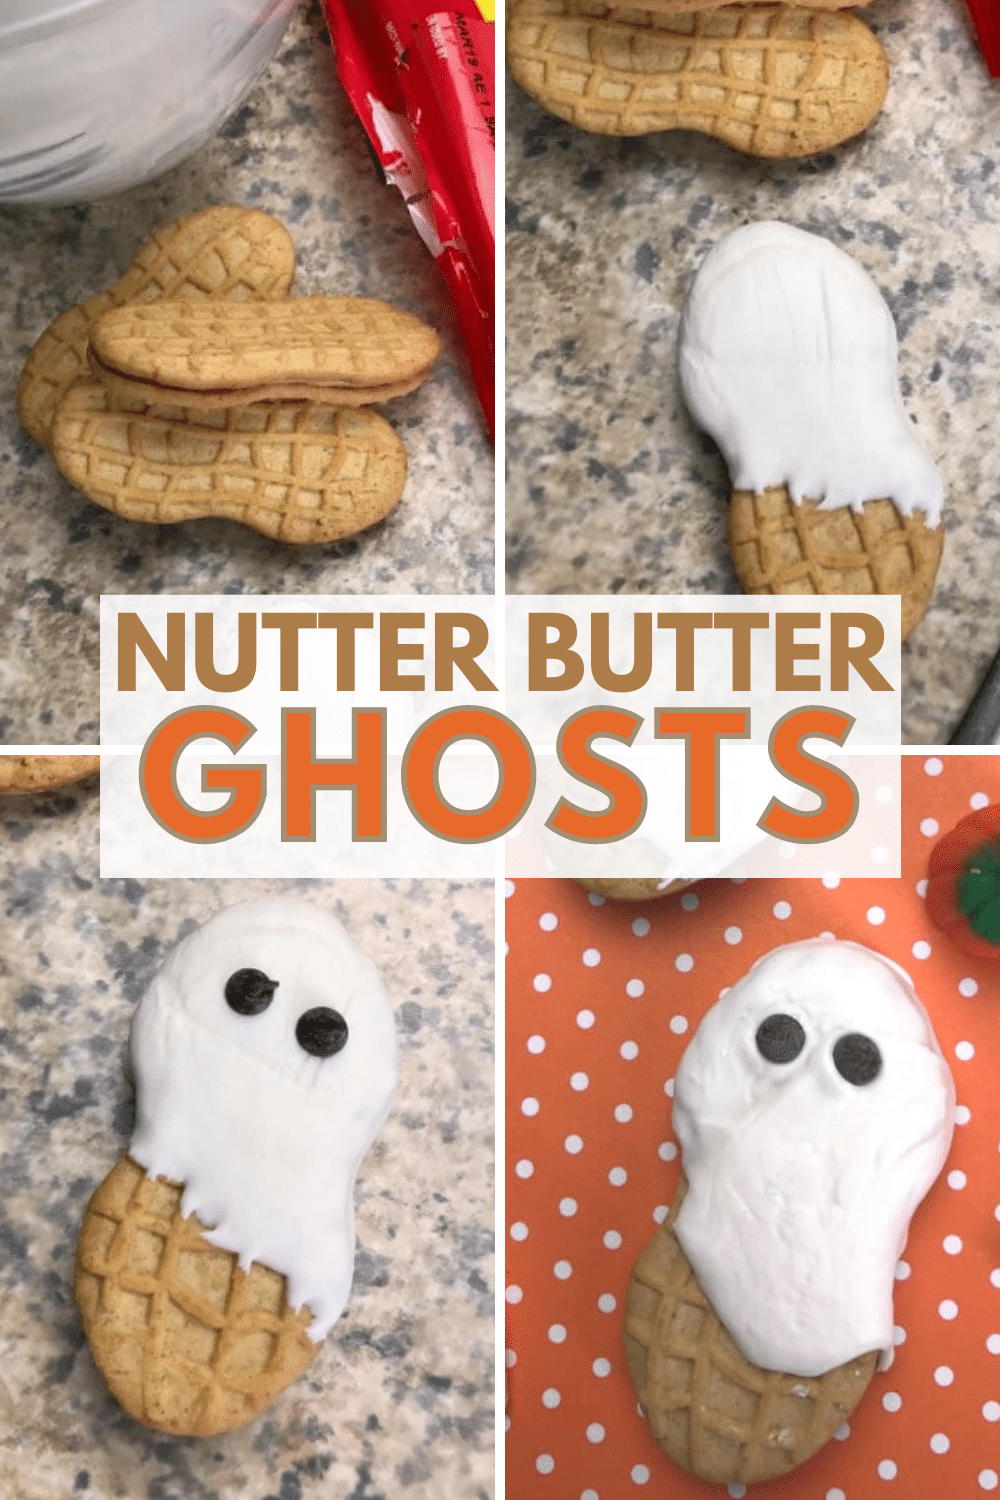 I can't get over how cute these Nutter Butter Ghosts are and how easy they are to make! These are going to be a blast to make with the kids. #halloween #funfoodforkids #easytreats via @wondermomwannab